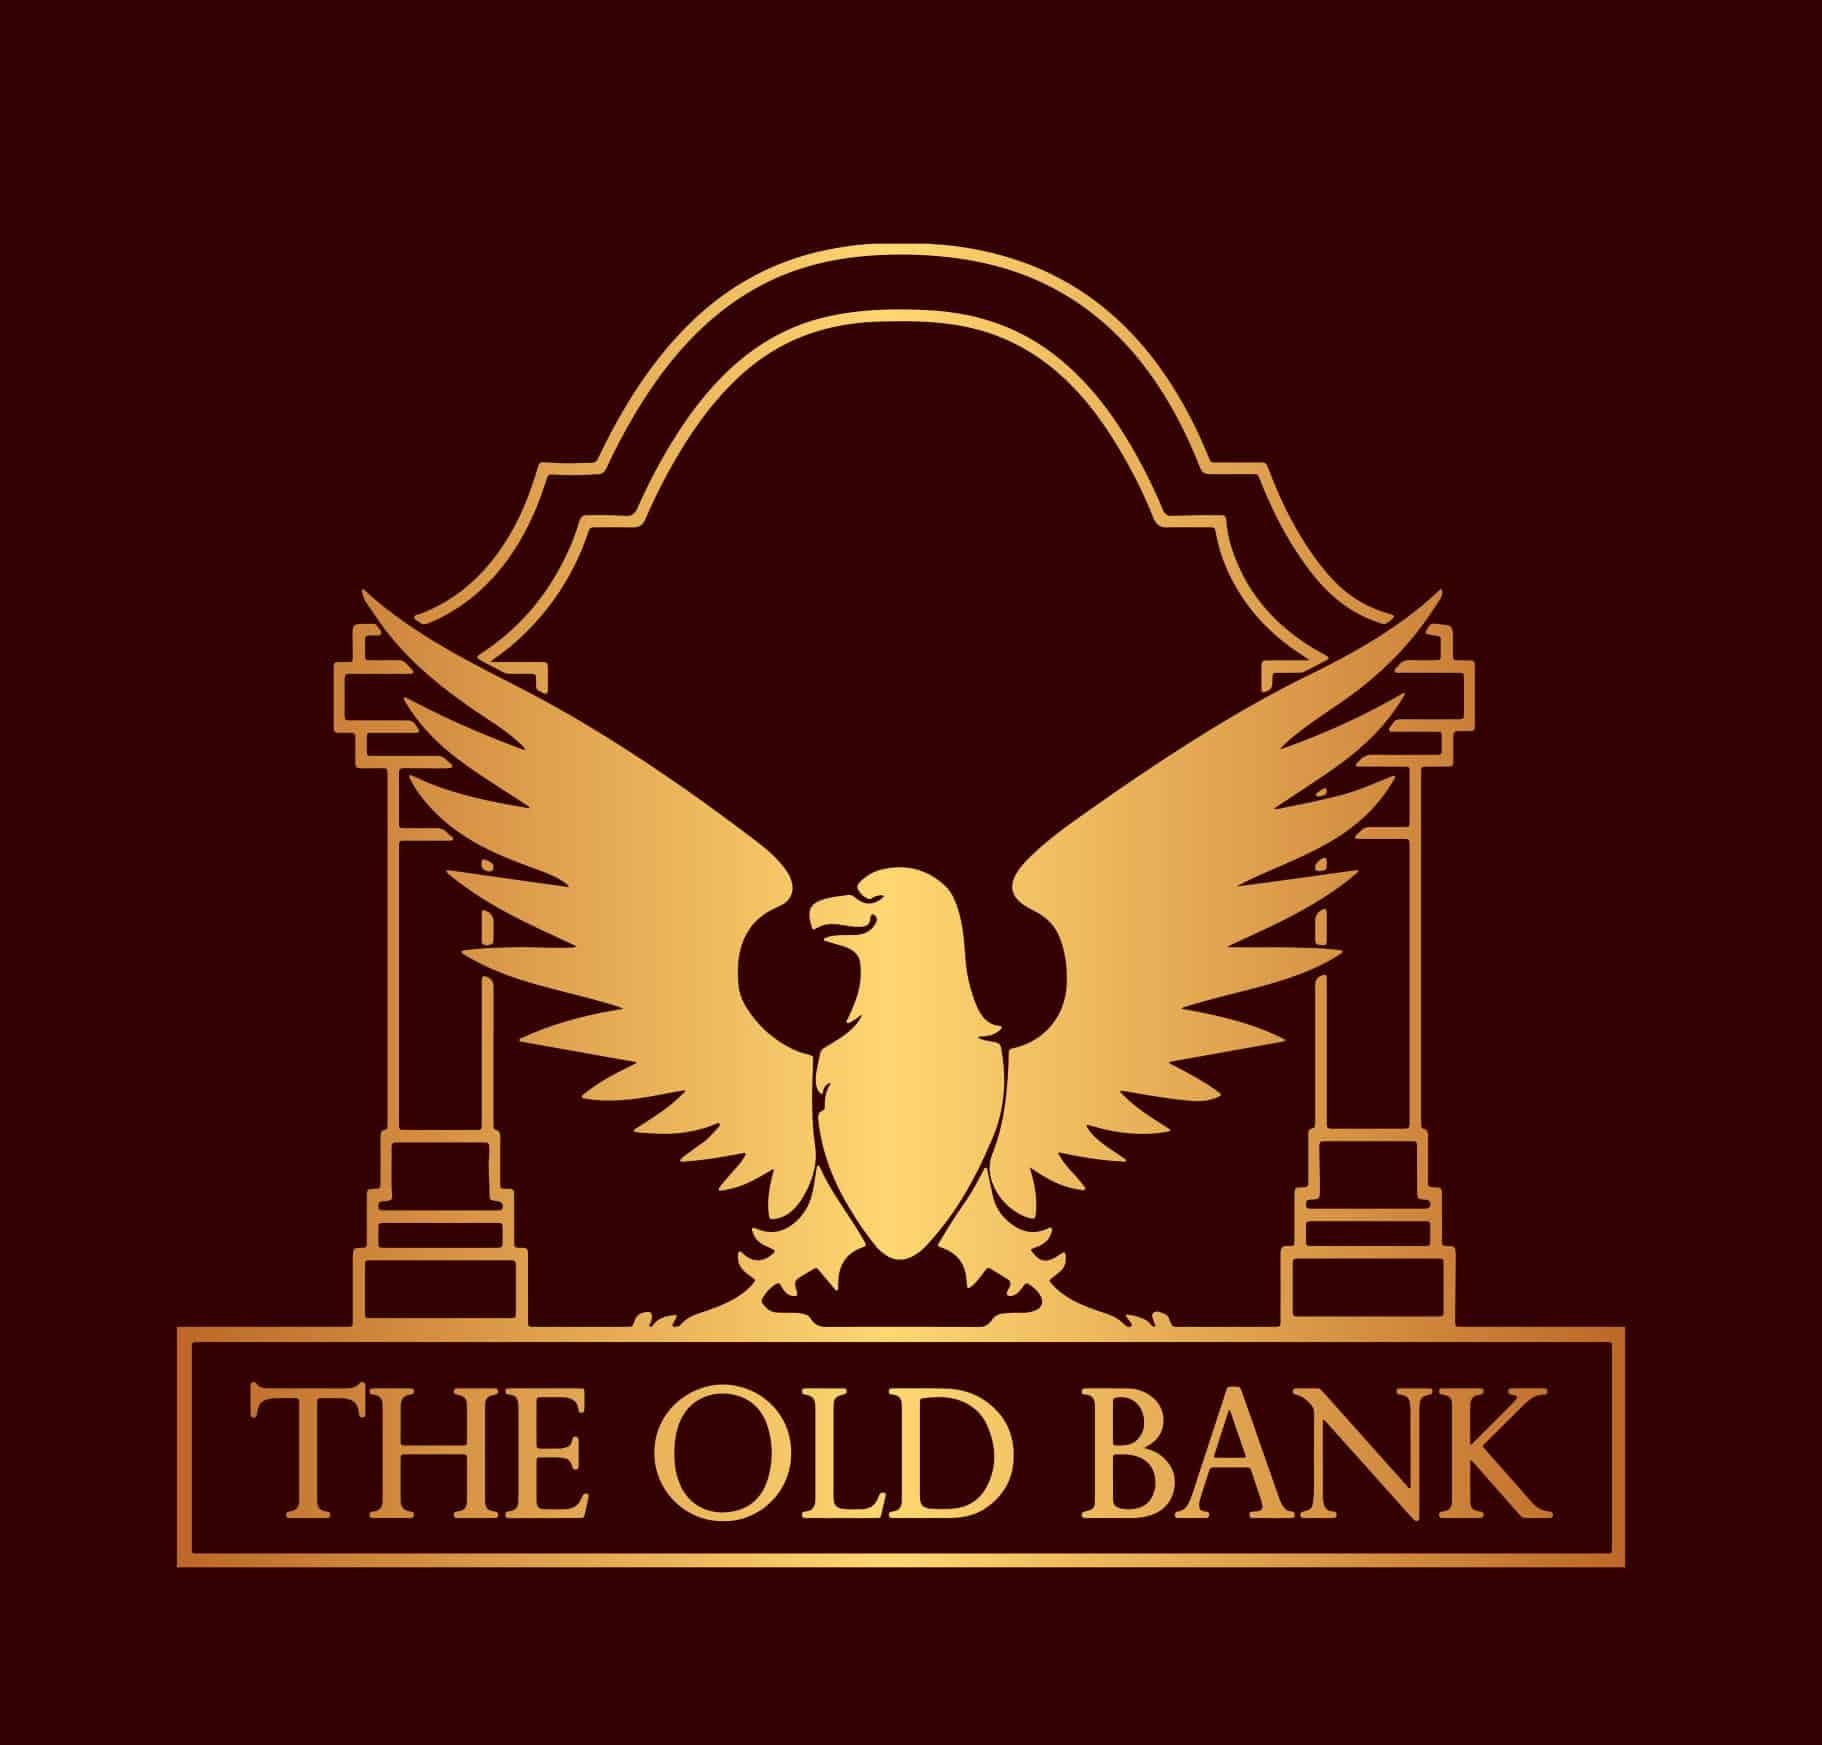 The Old Bank